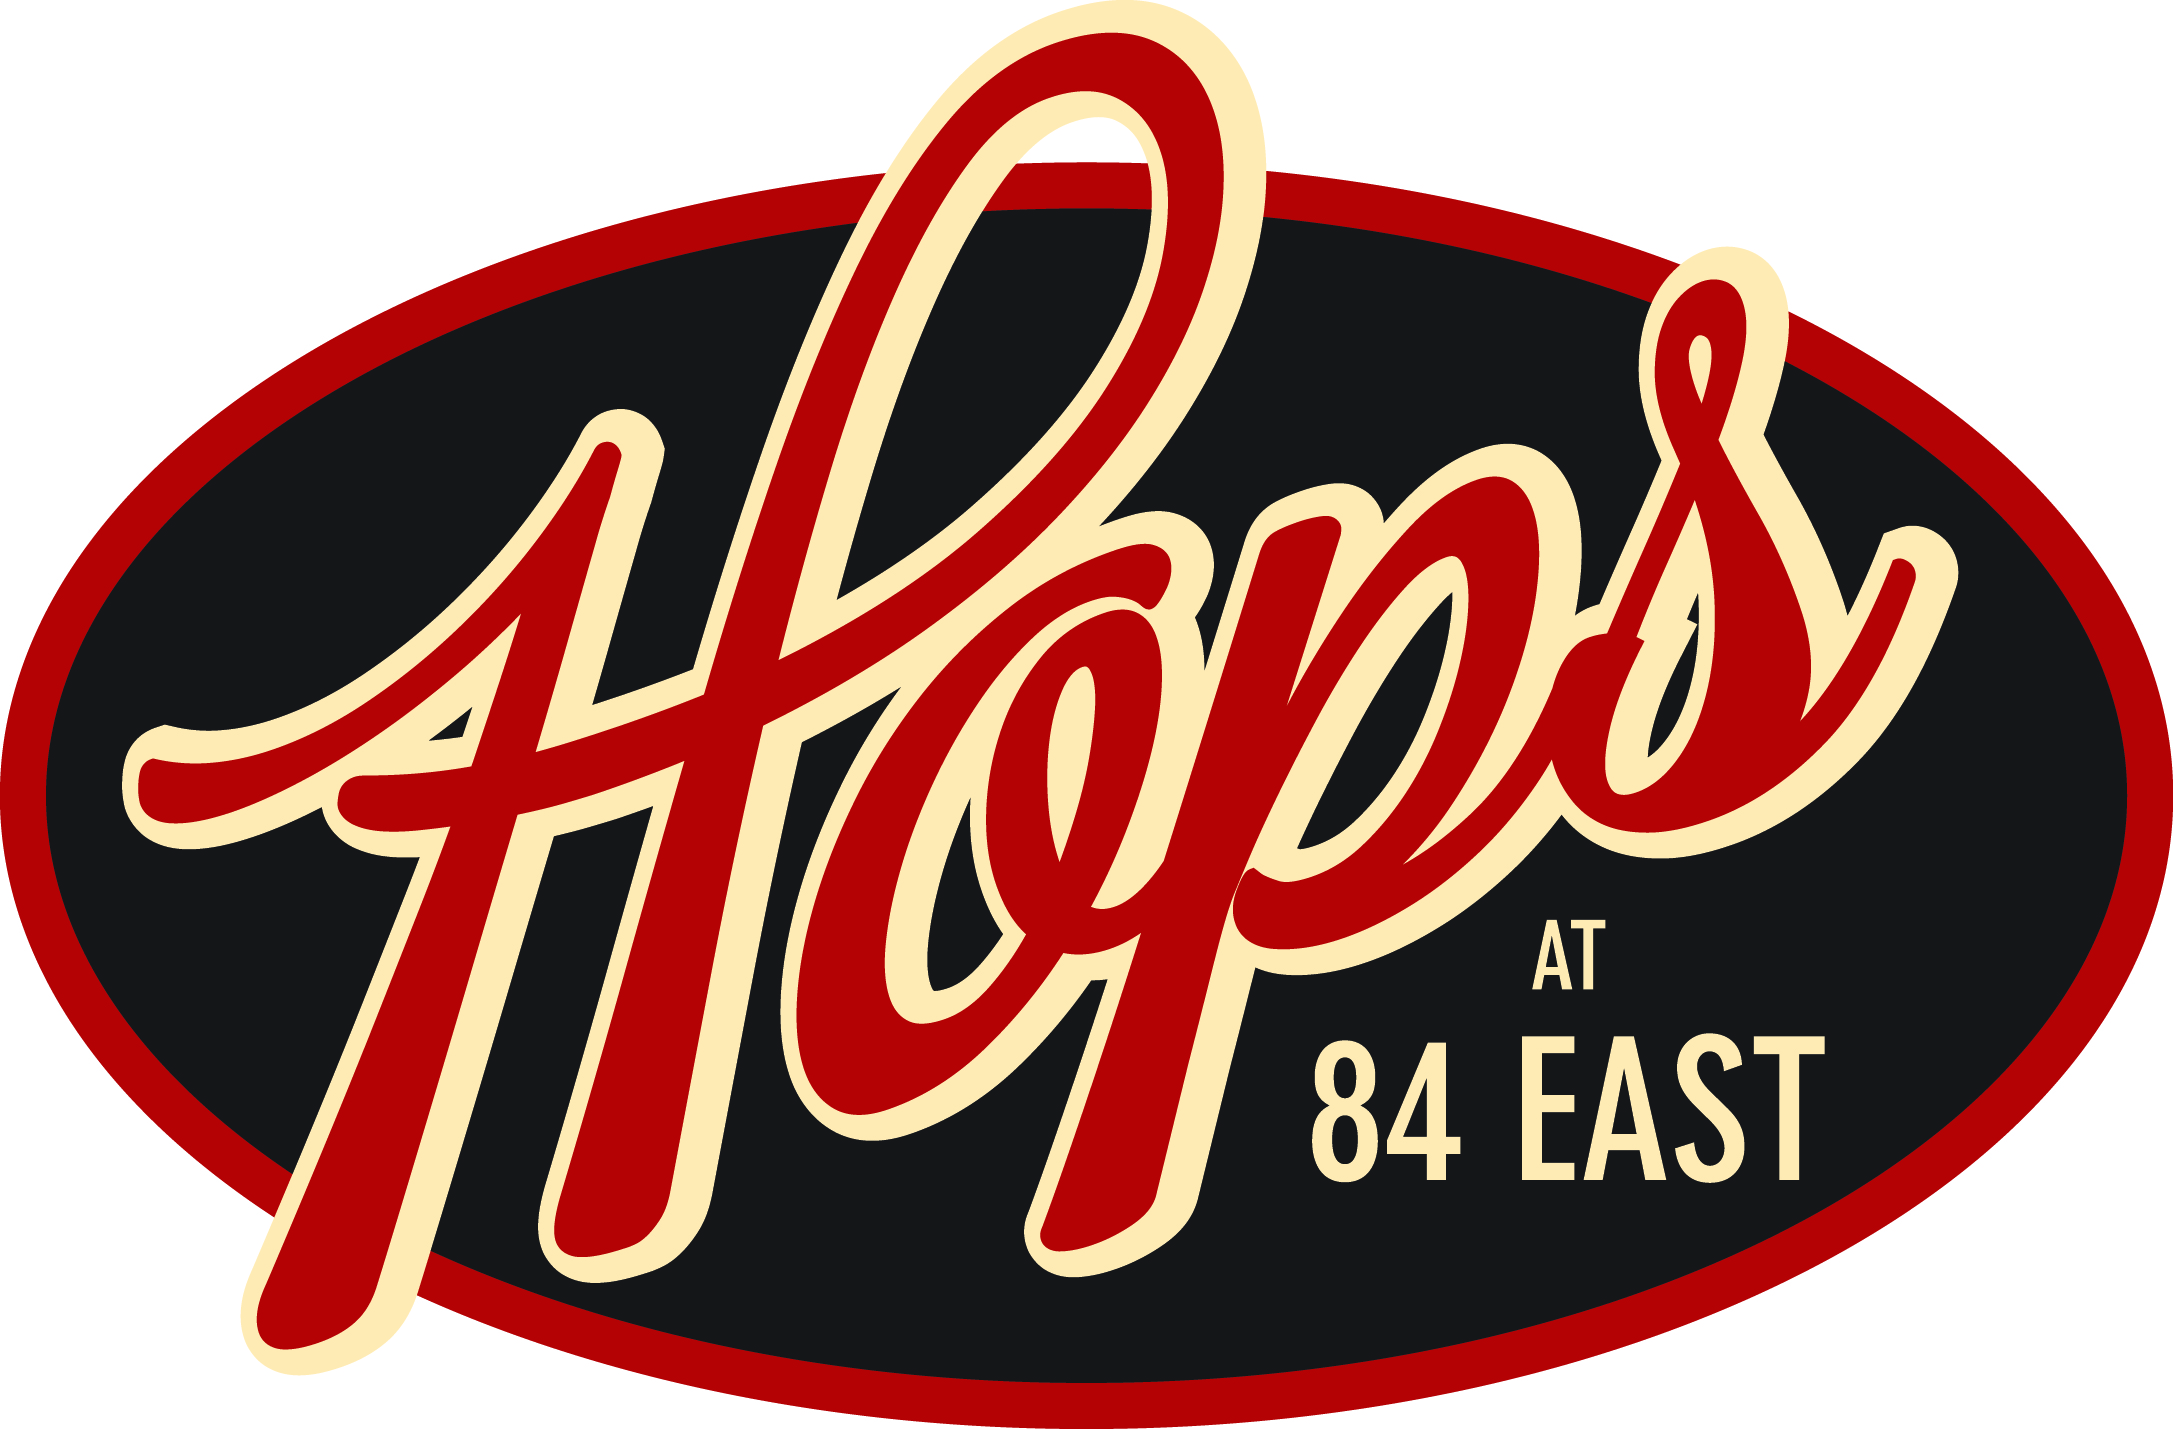 Hops at 84 East Home